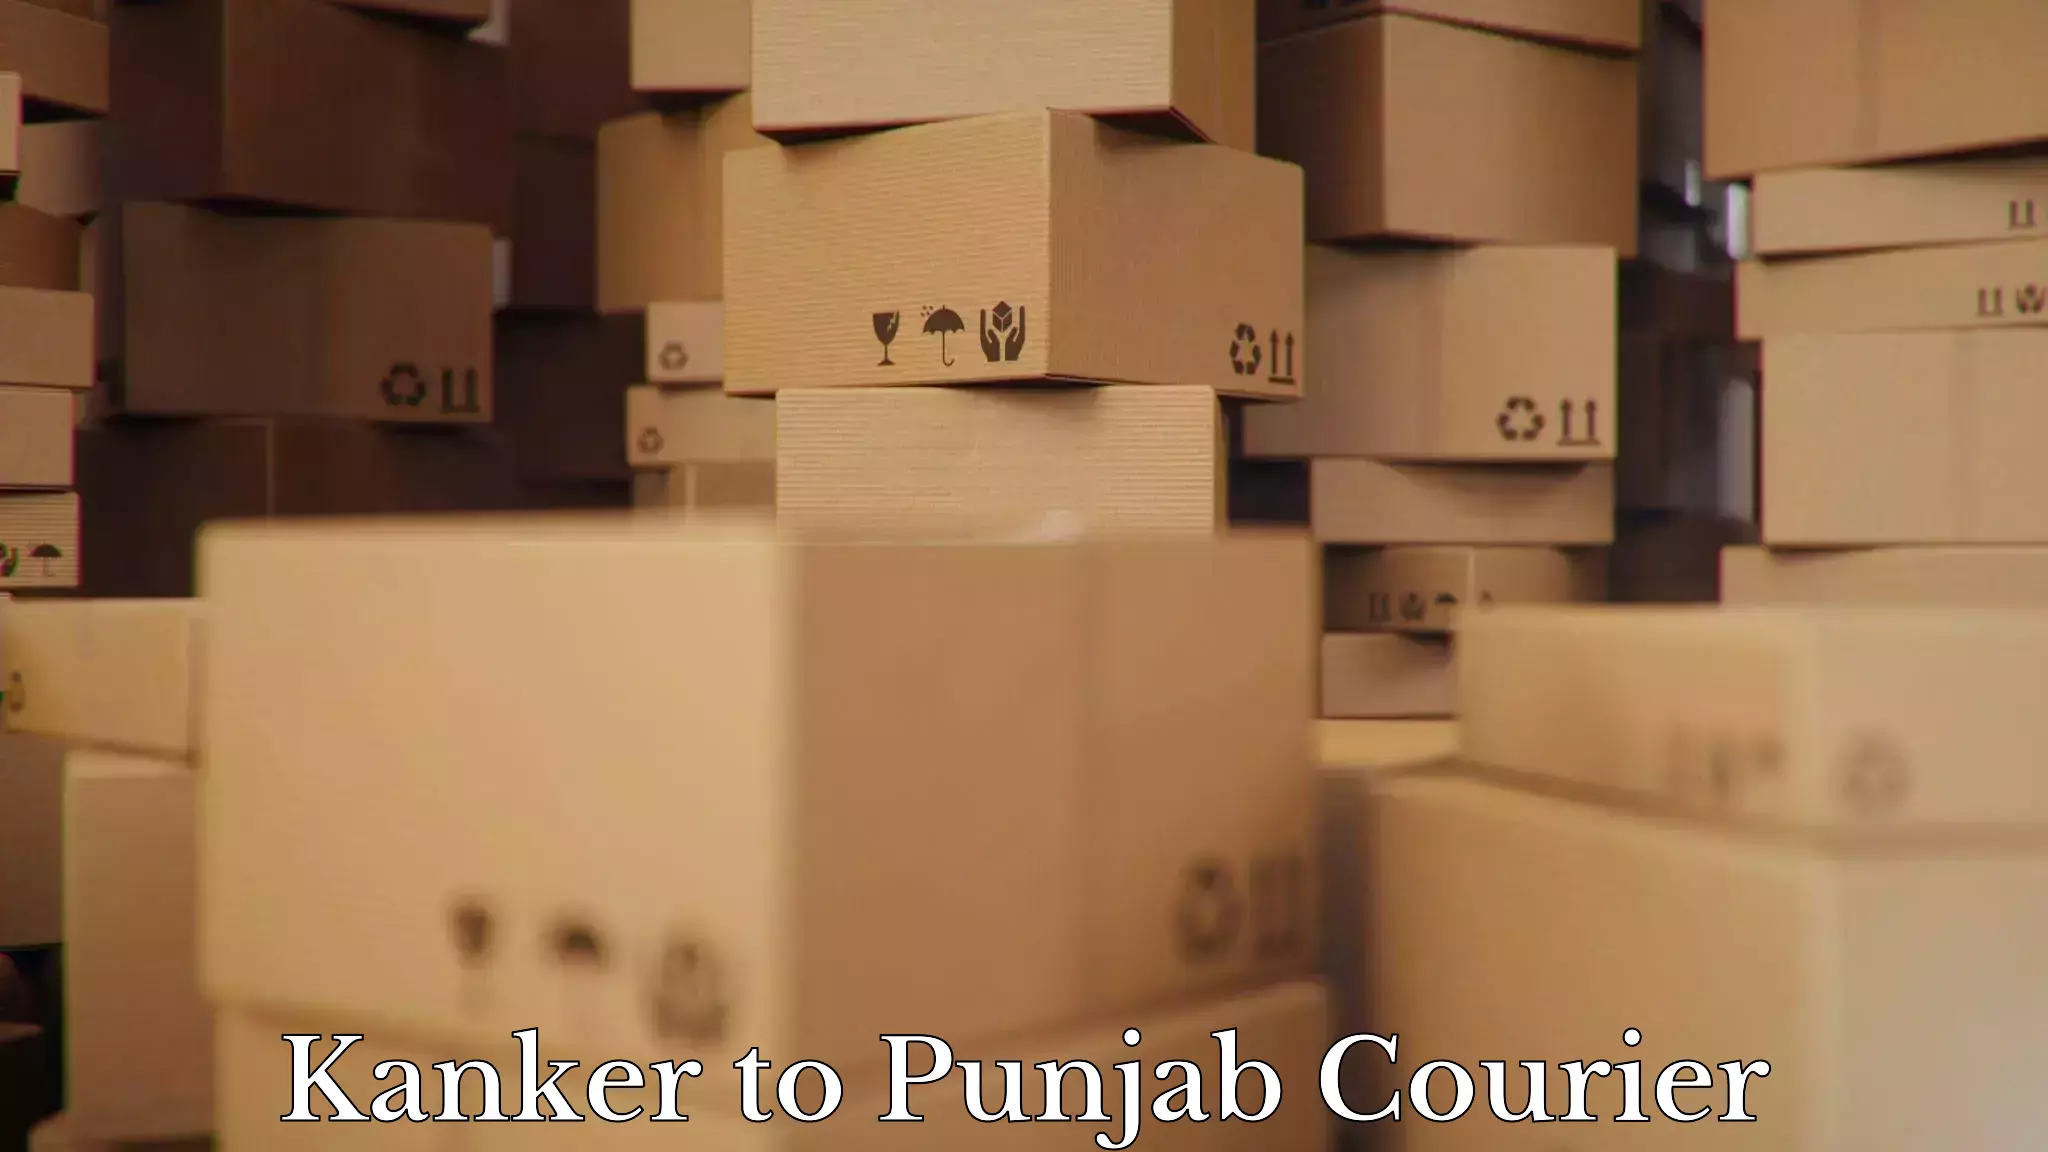 Moving and storage services in Kanker to Amritsar